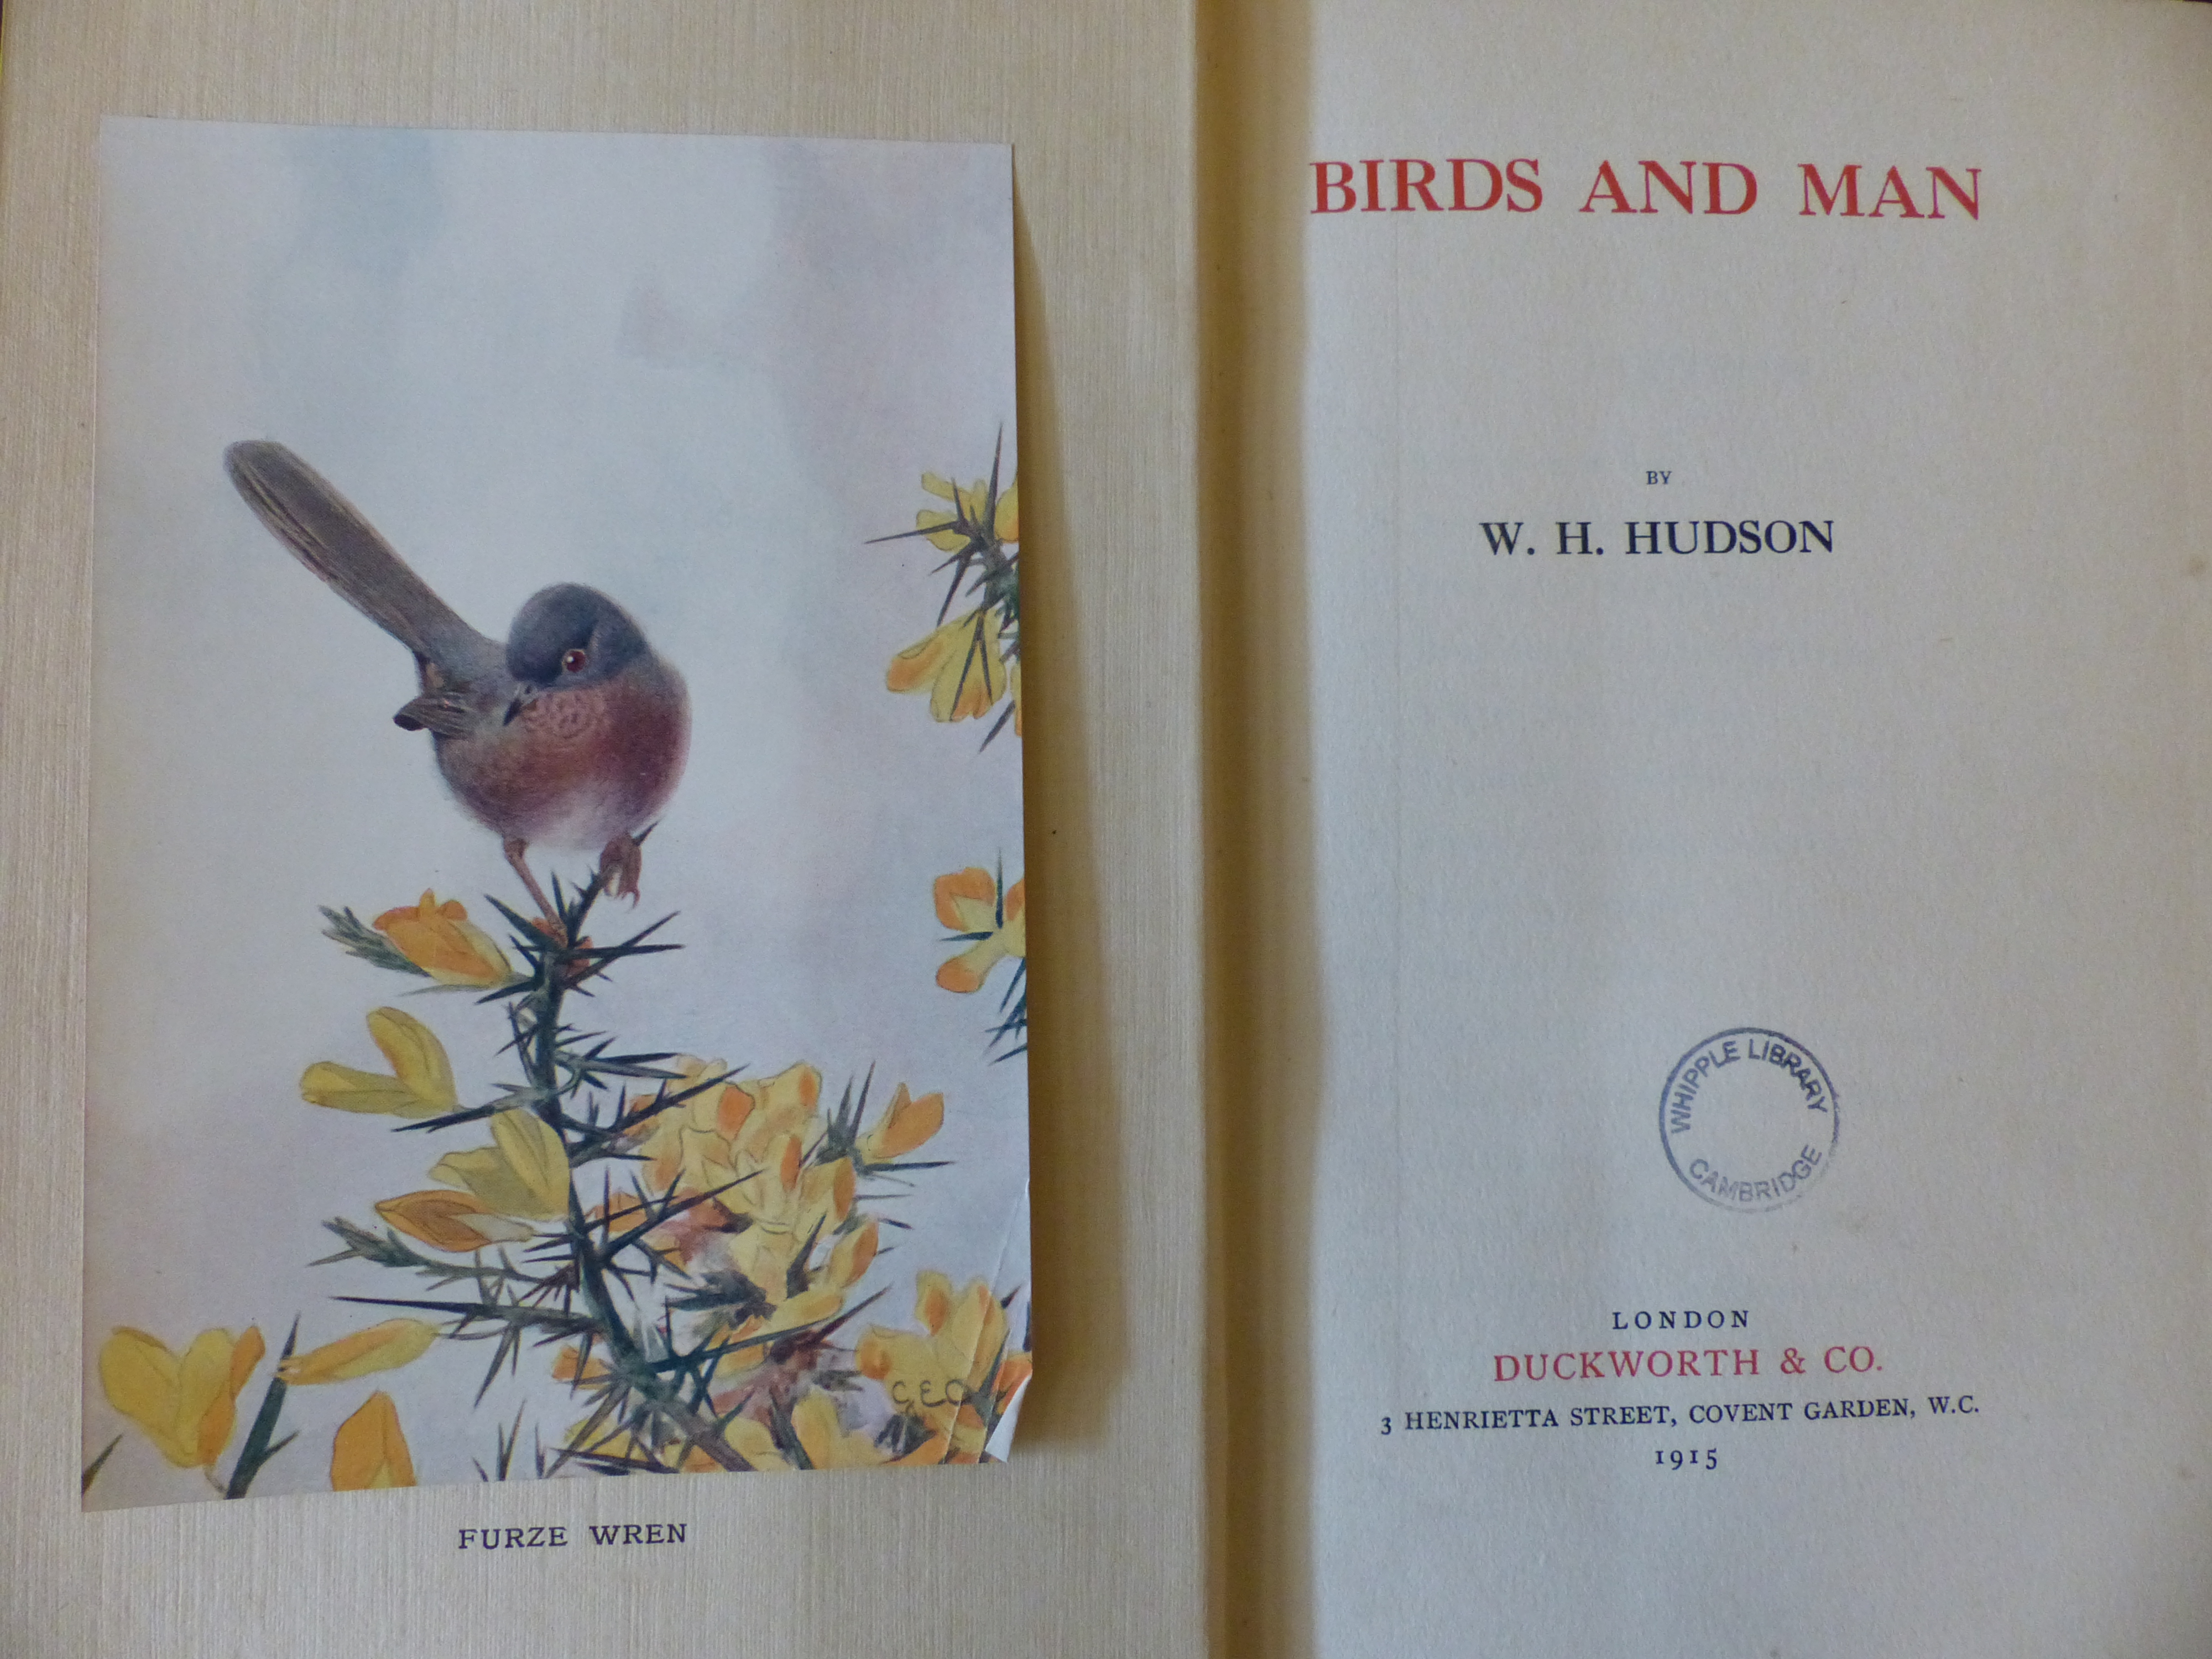 Birds and man / W.H. Hudson STORE 211:58